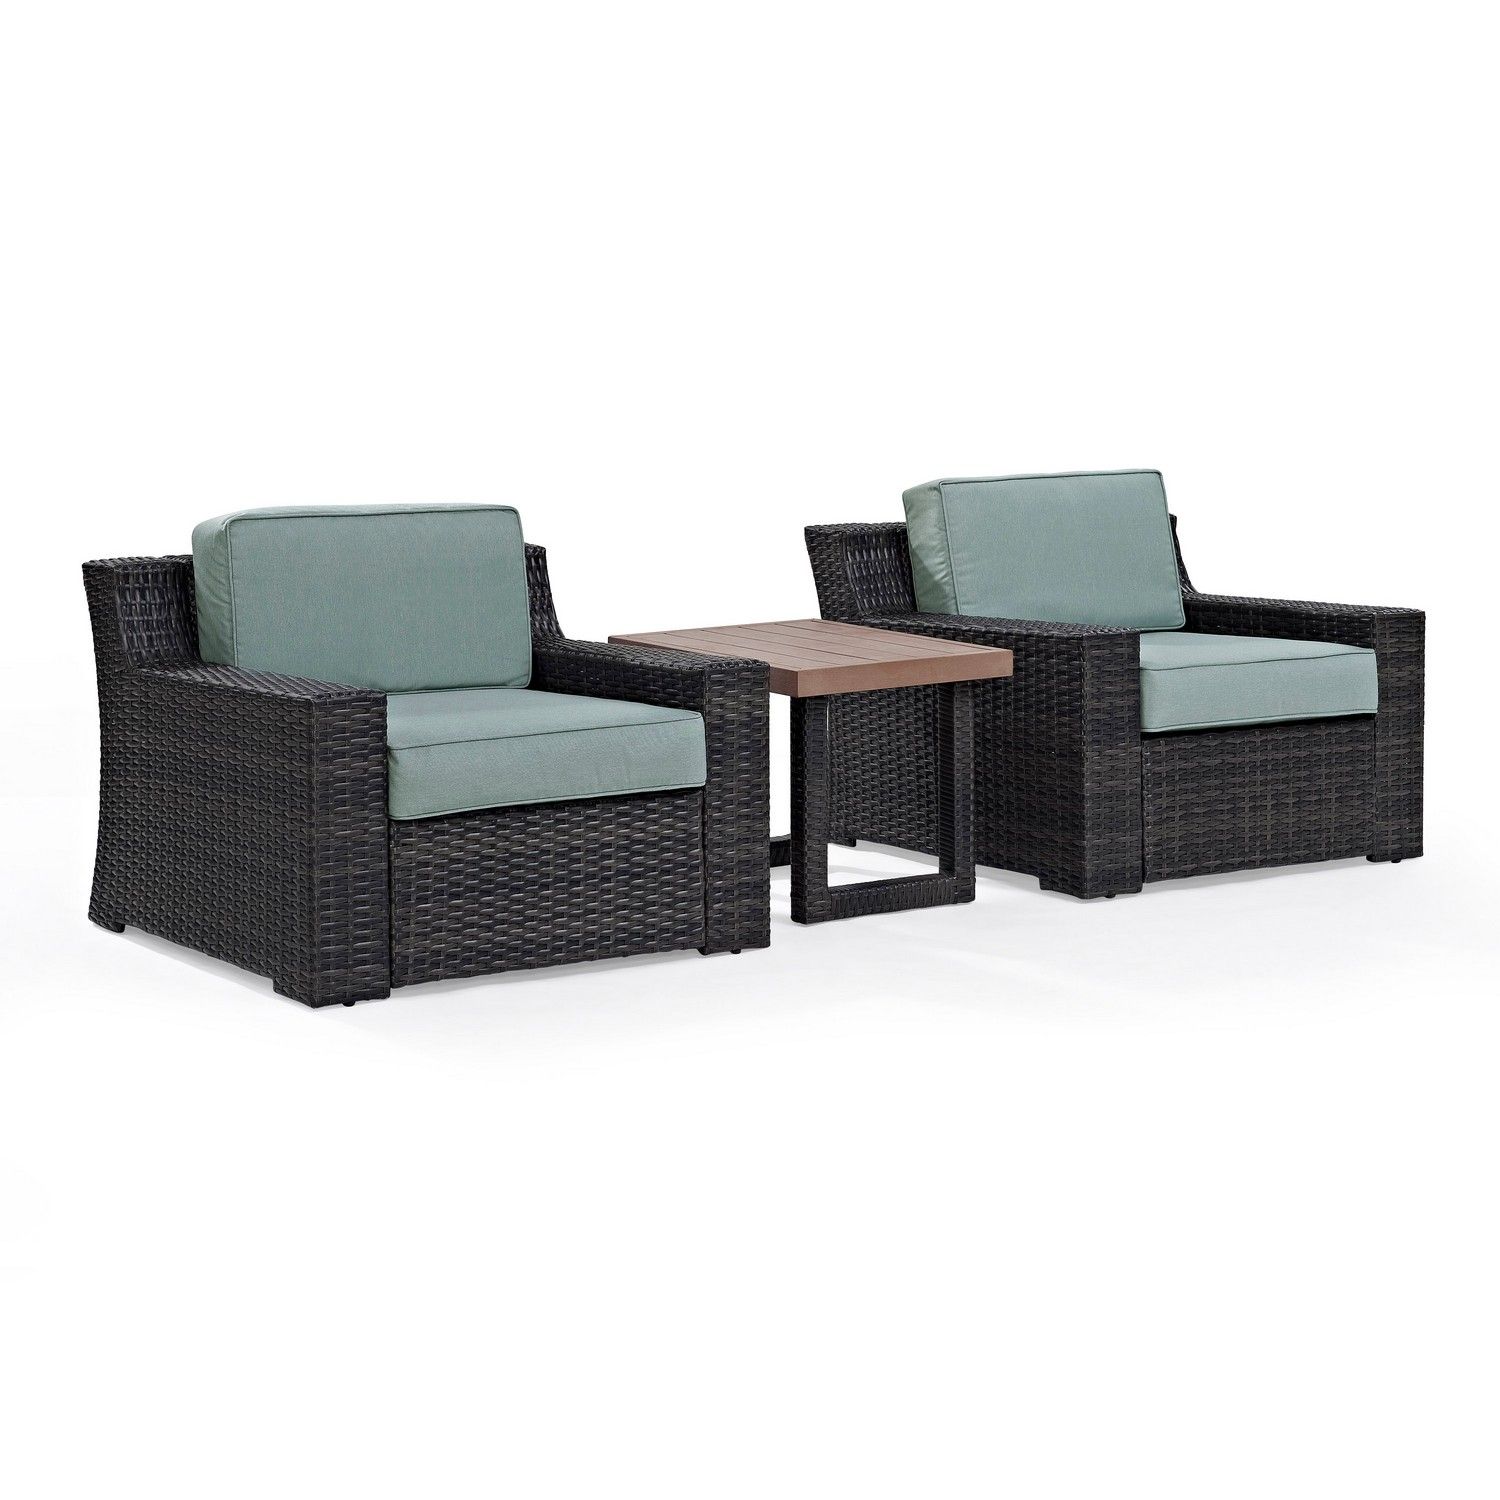 Crosley Beaufort 3-PC Outdoor Wicker Chair Set - Side Table and 2 Chairs - Mist/Brown